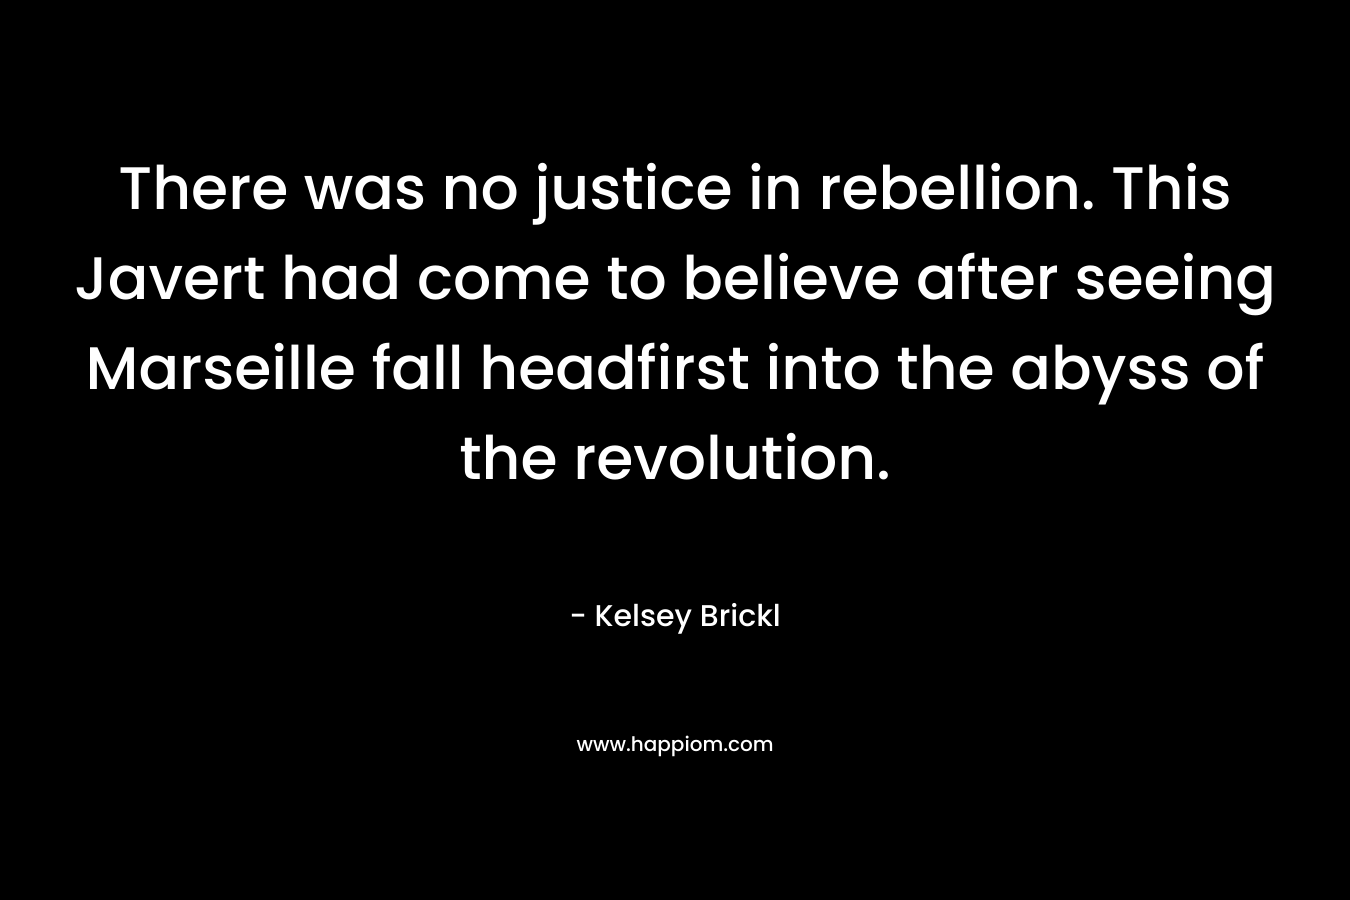 There was no justice in rebellion. This Javert had come to believe after seeing Marseille fall headfirst into the abyss of the revolution. – Kelsey Brickl